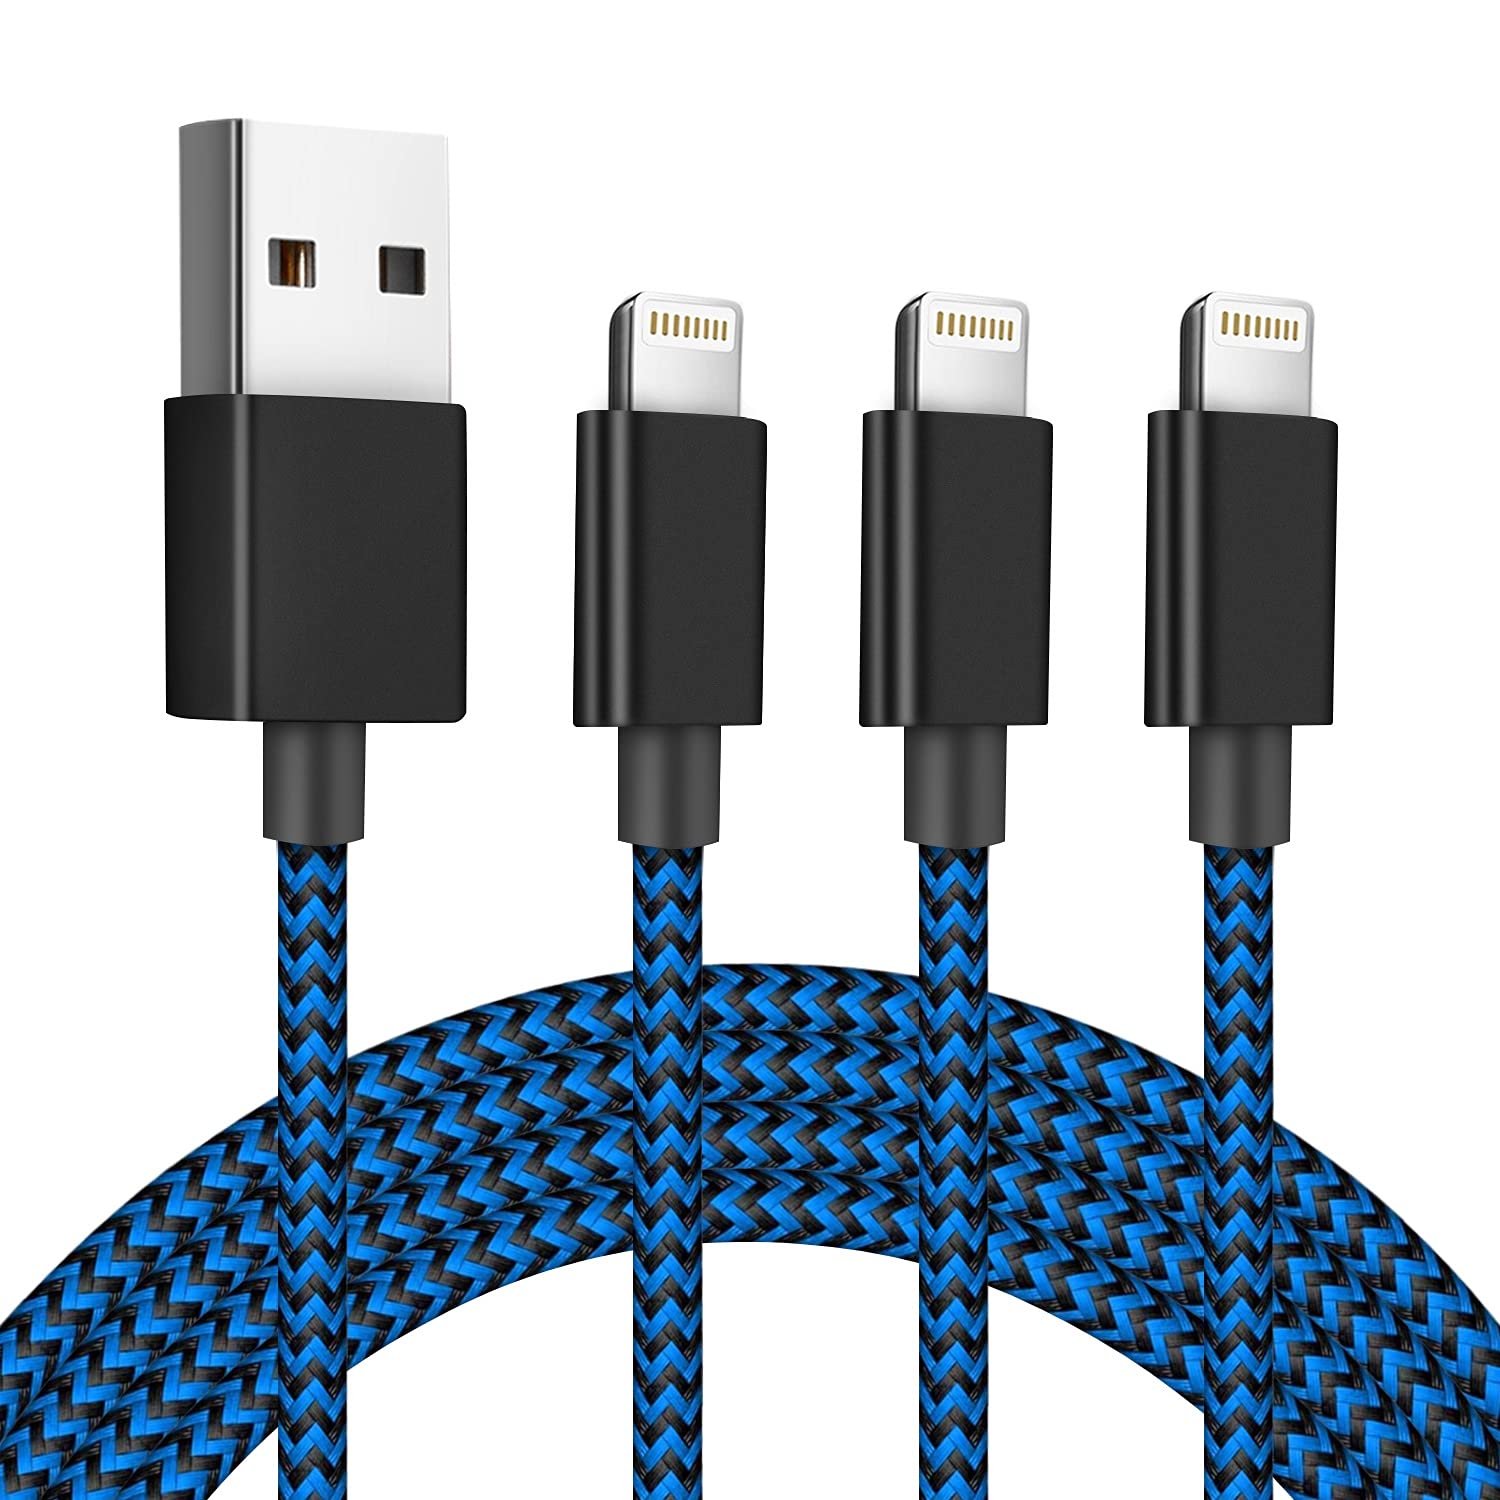 Apple Mfi Certified 3Pack 10ft iPhone Charger Cable Nylon Braided Lightning cable $4.99